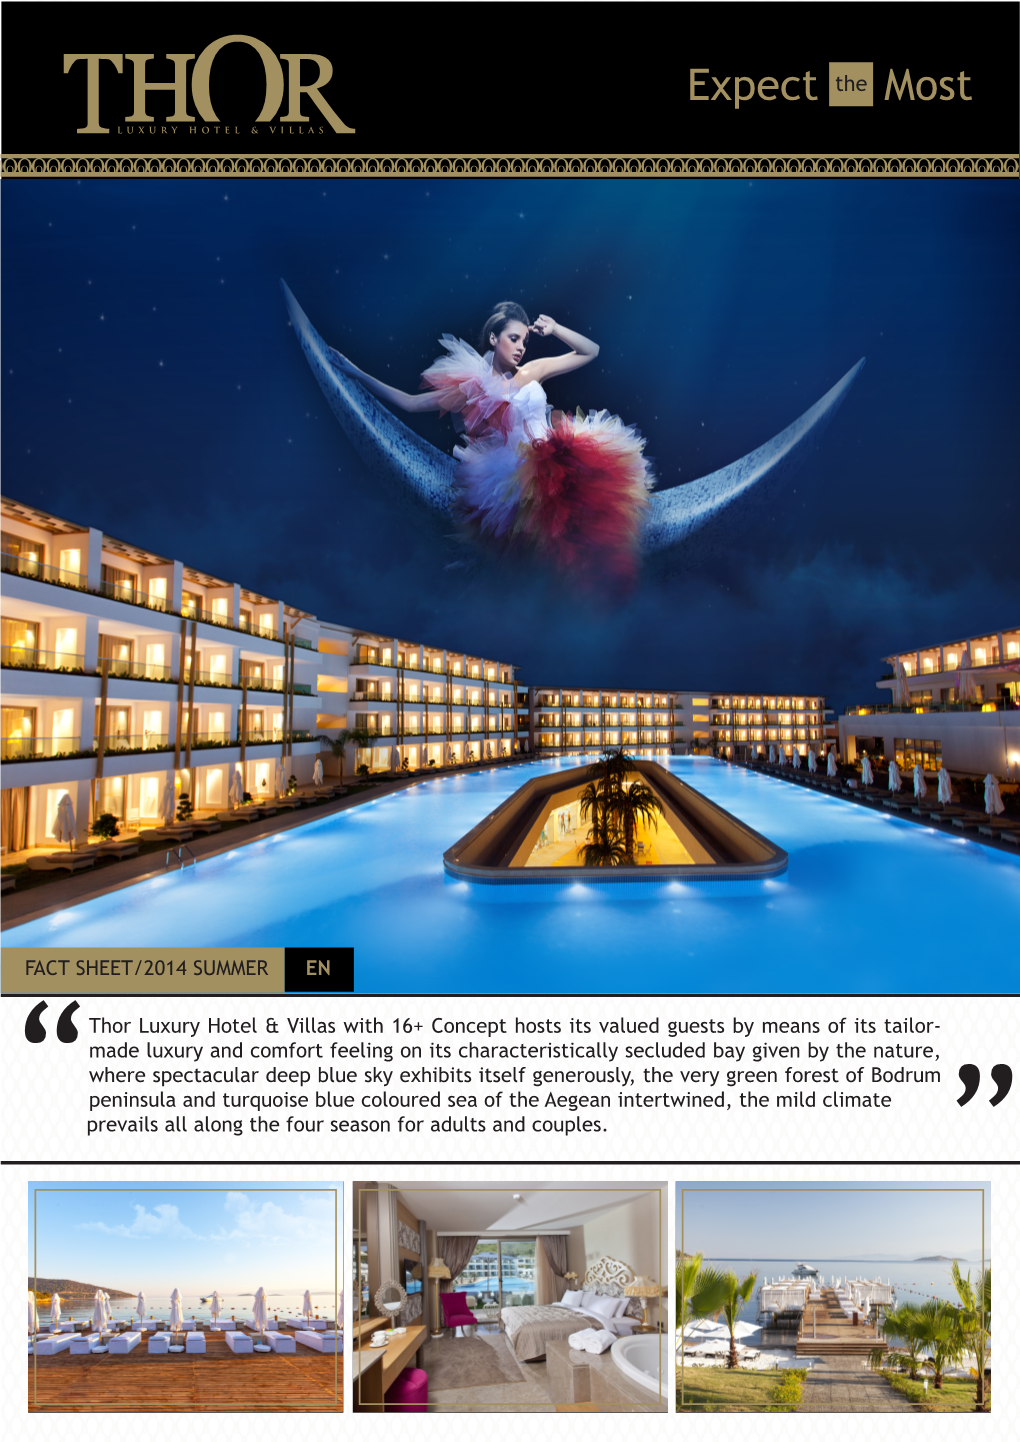 “Thor Luxury Hotel & Villas with 16+ Concept Hosts Its